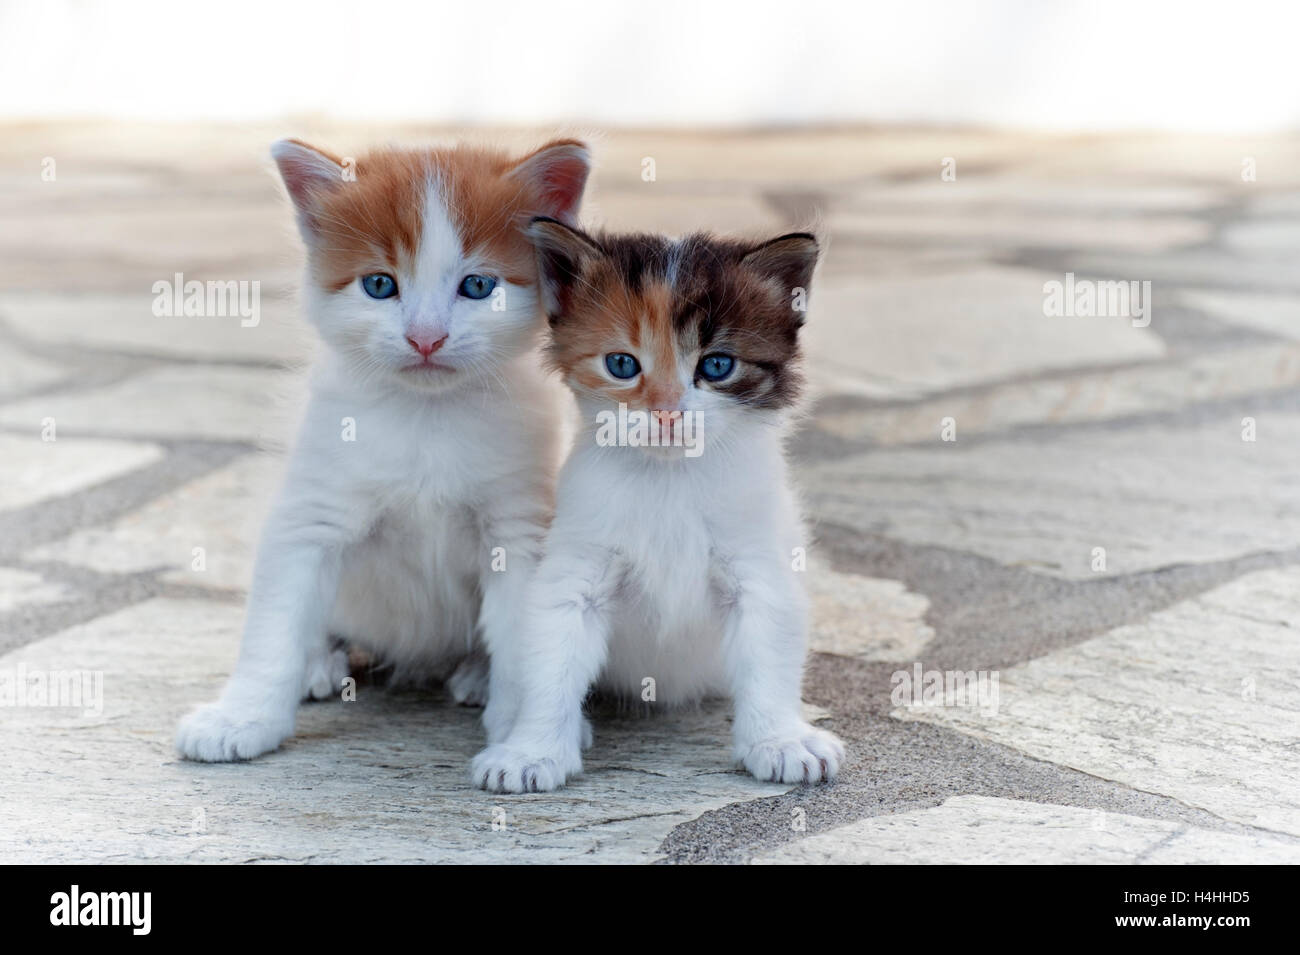 Two four weeks old kittens sitting side by side and looking at camera Stock Photo